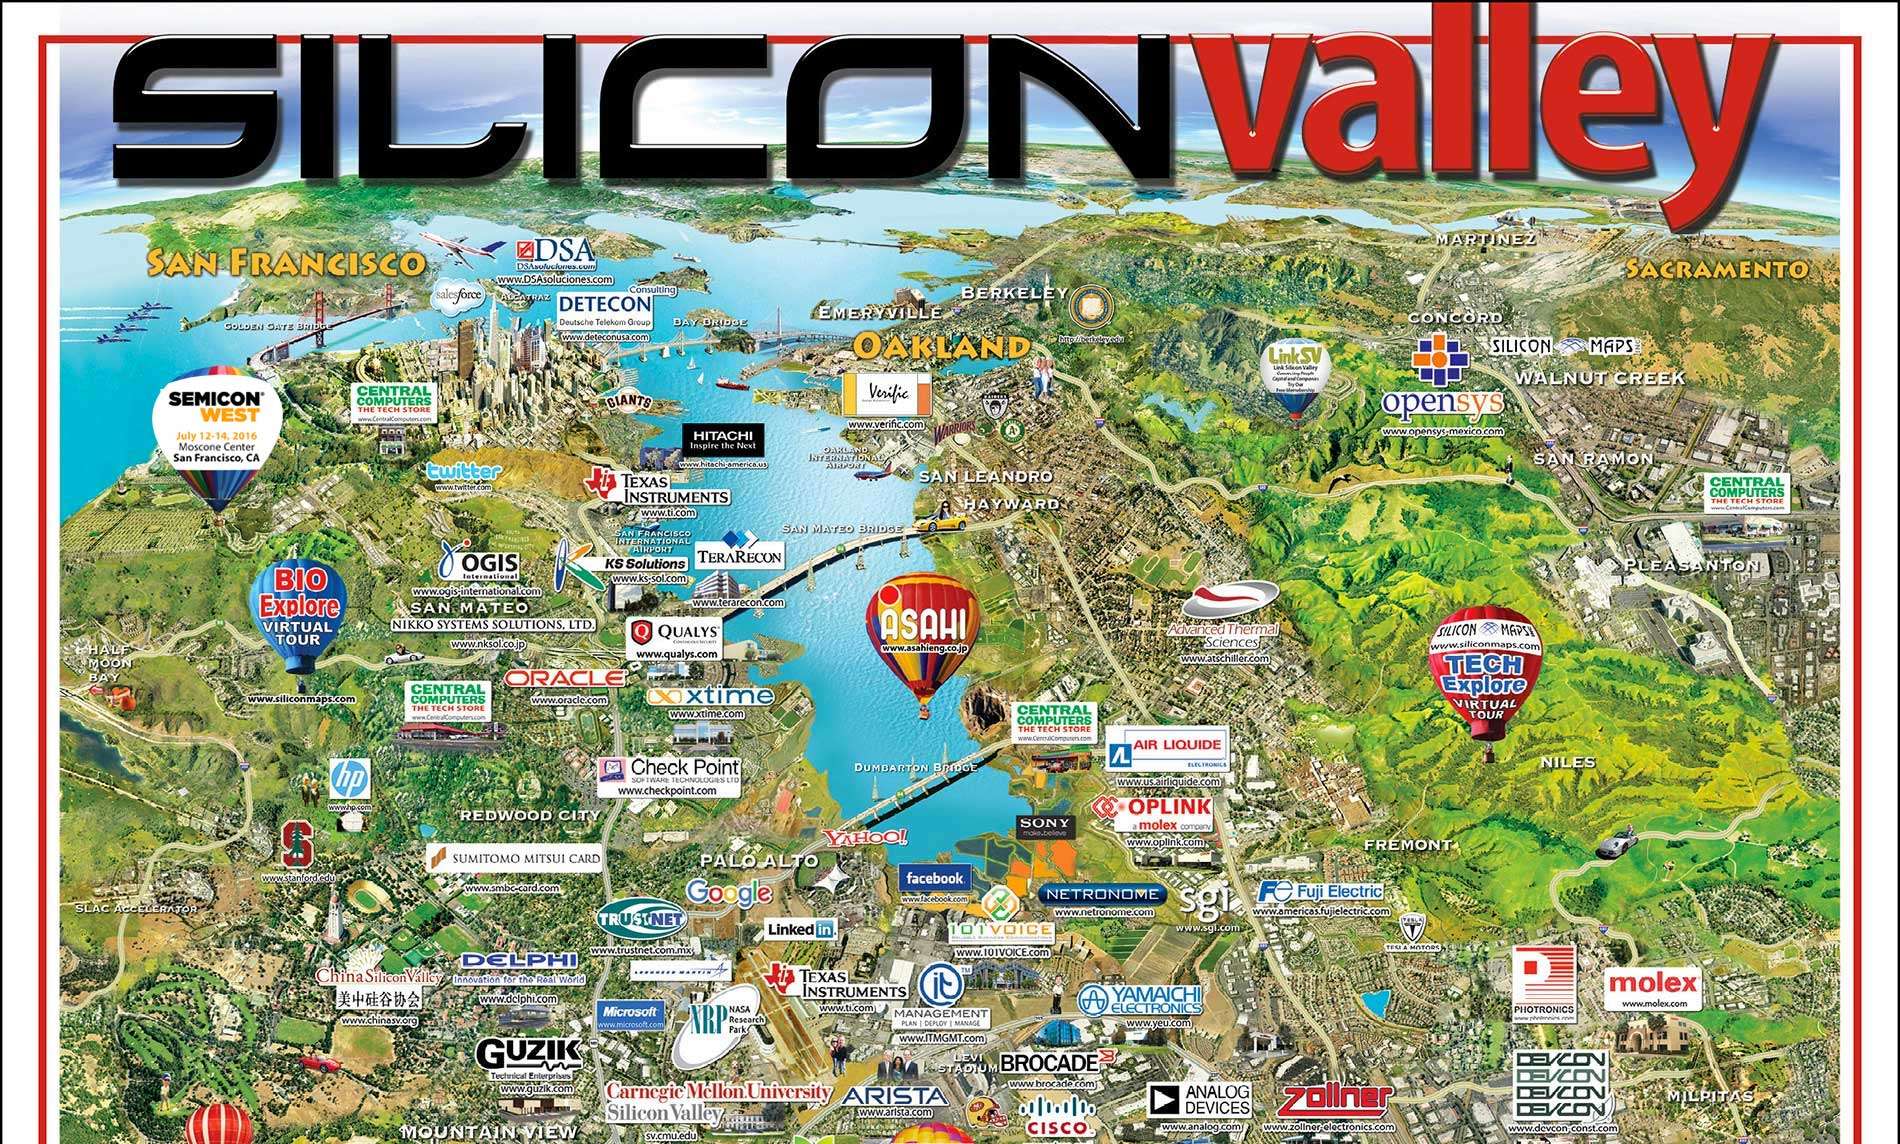 The New Way Silicon Valley is Enhancing Performance